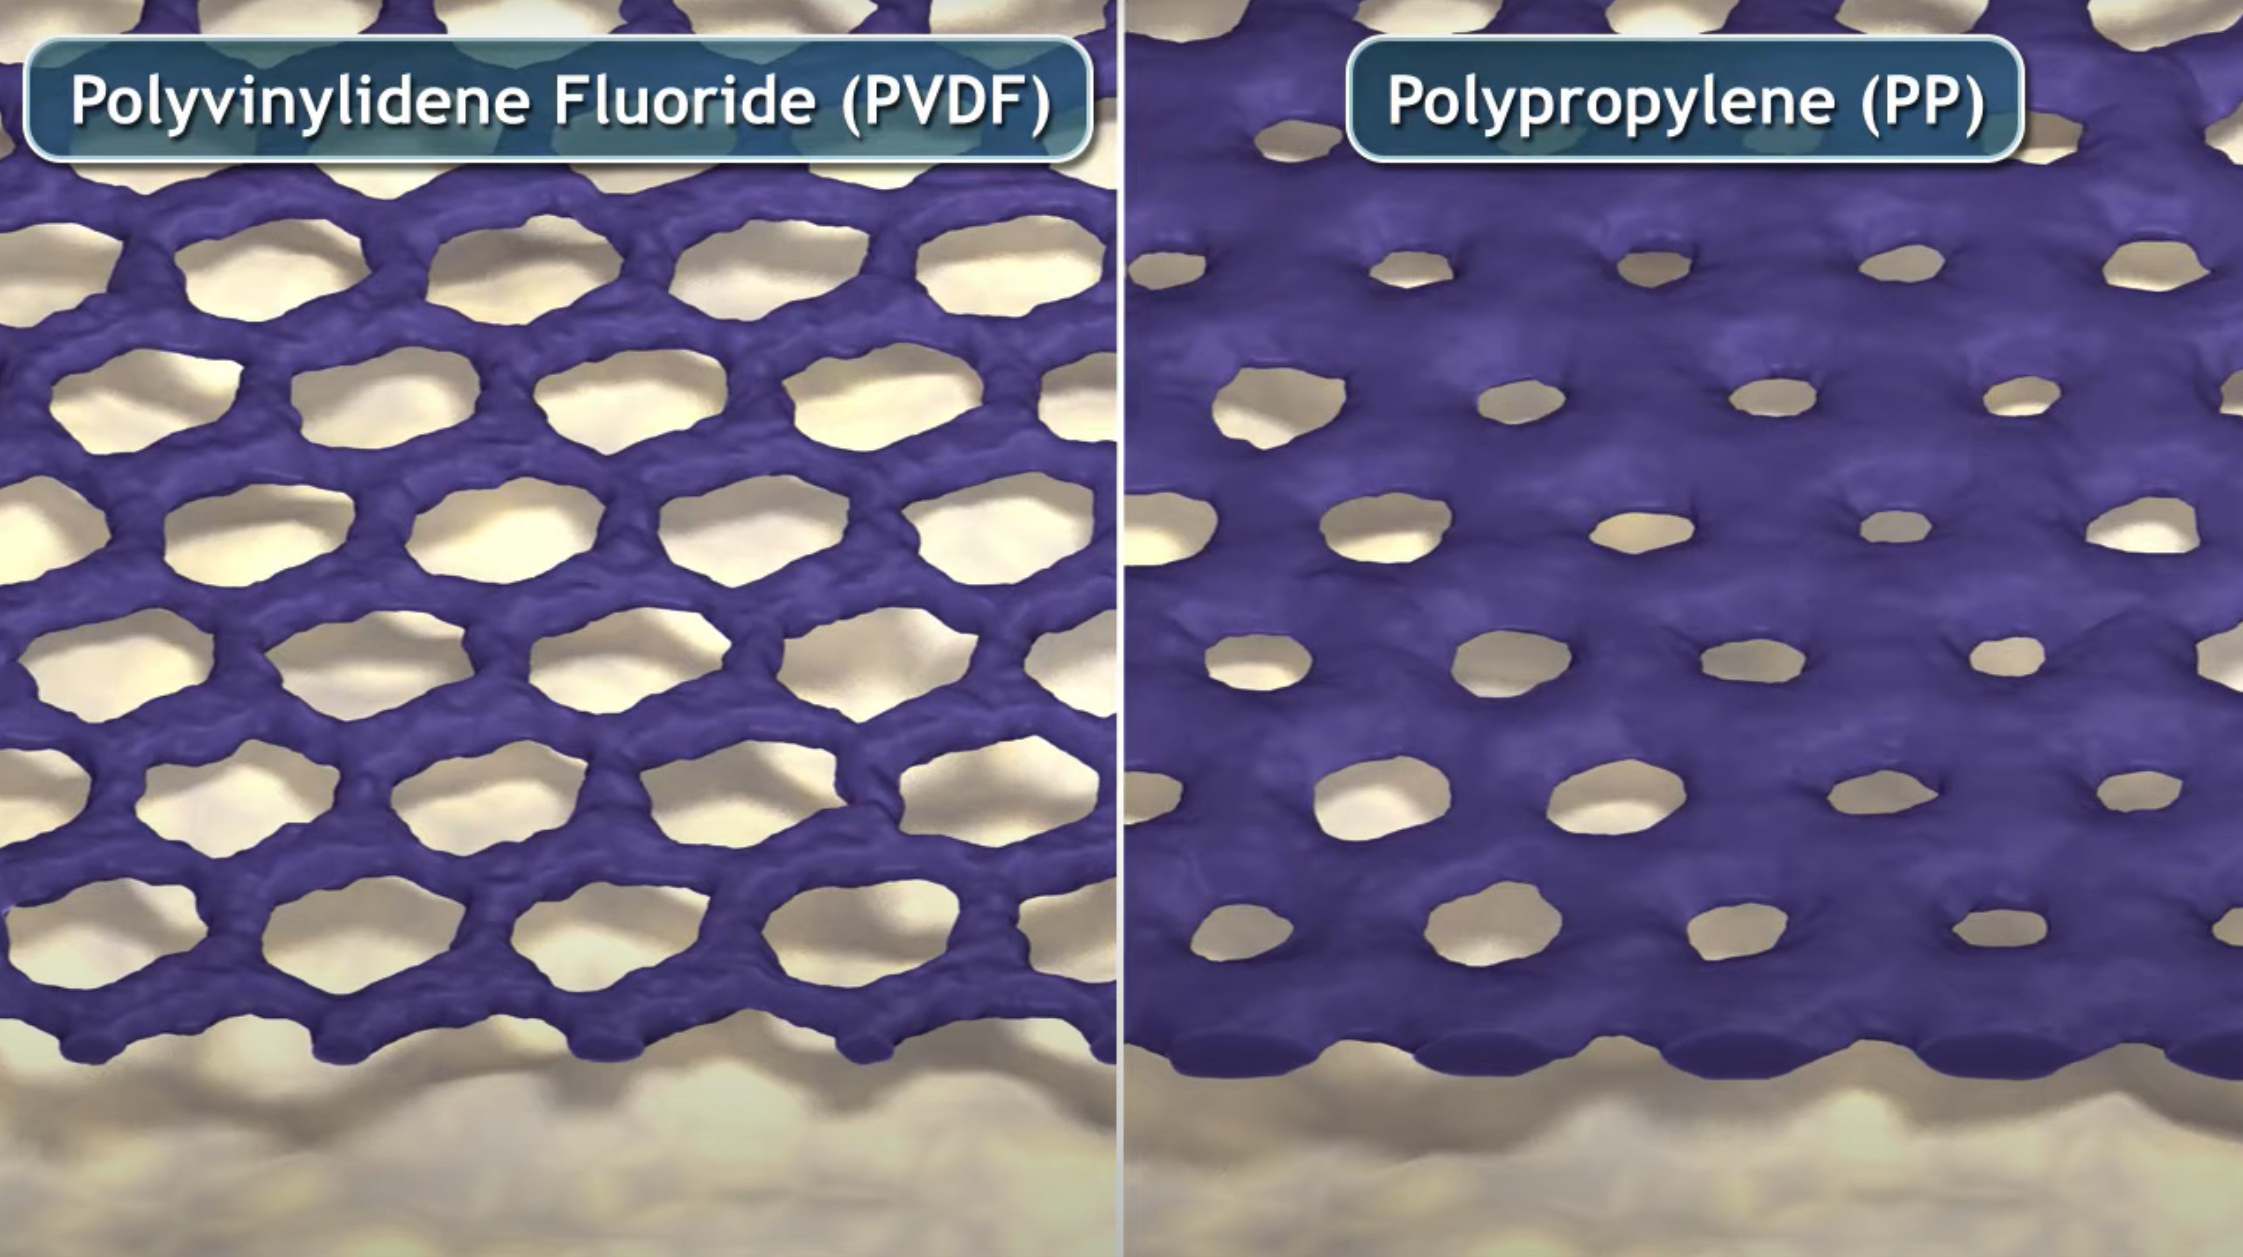 Foreign Body Reaction – Comparison of PVDF and PP